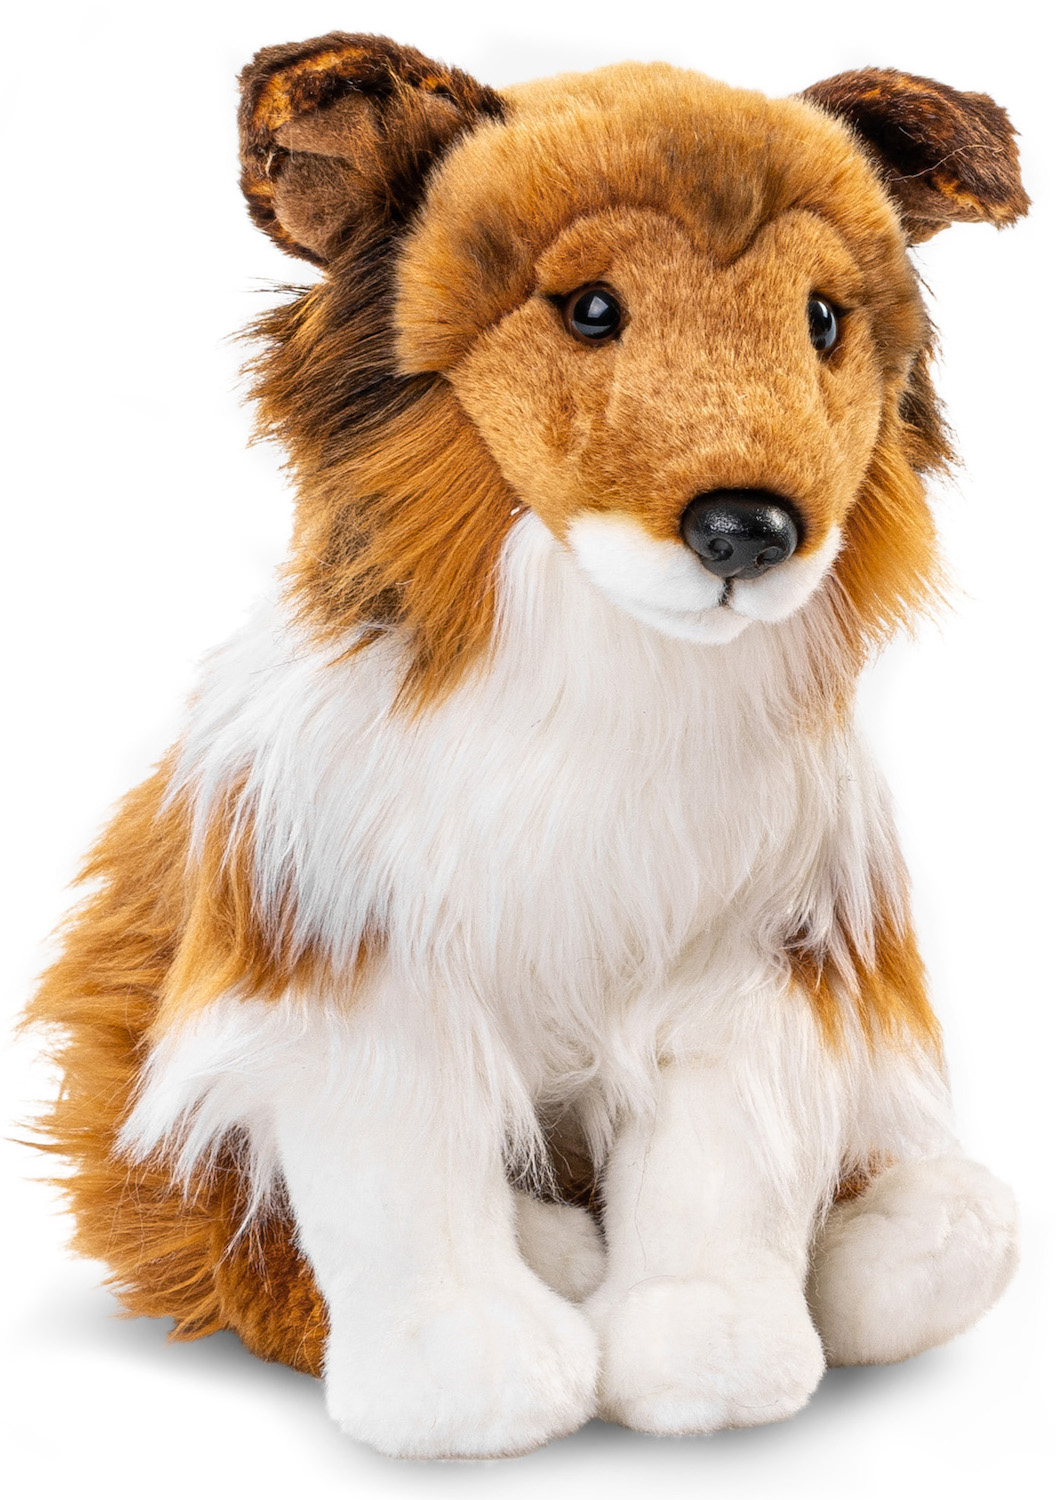 Rough Collie, Sitting - Brown Face - 27 cm (height) - Plush Dog, Collie, Pet - Stuffed Animal, Cuddly Toy